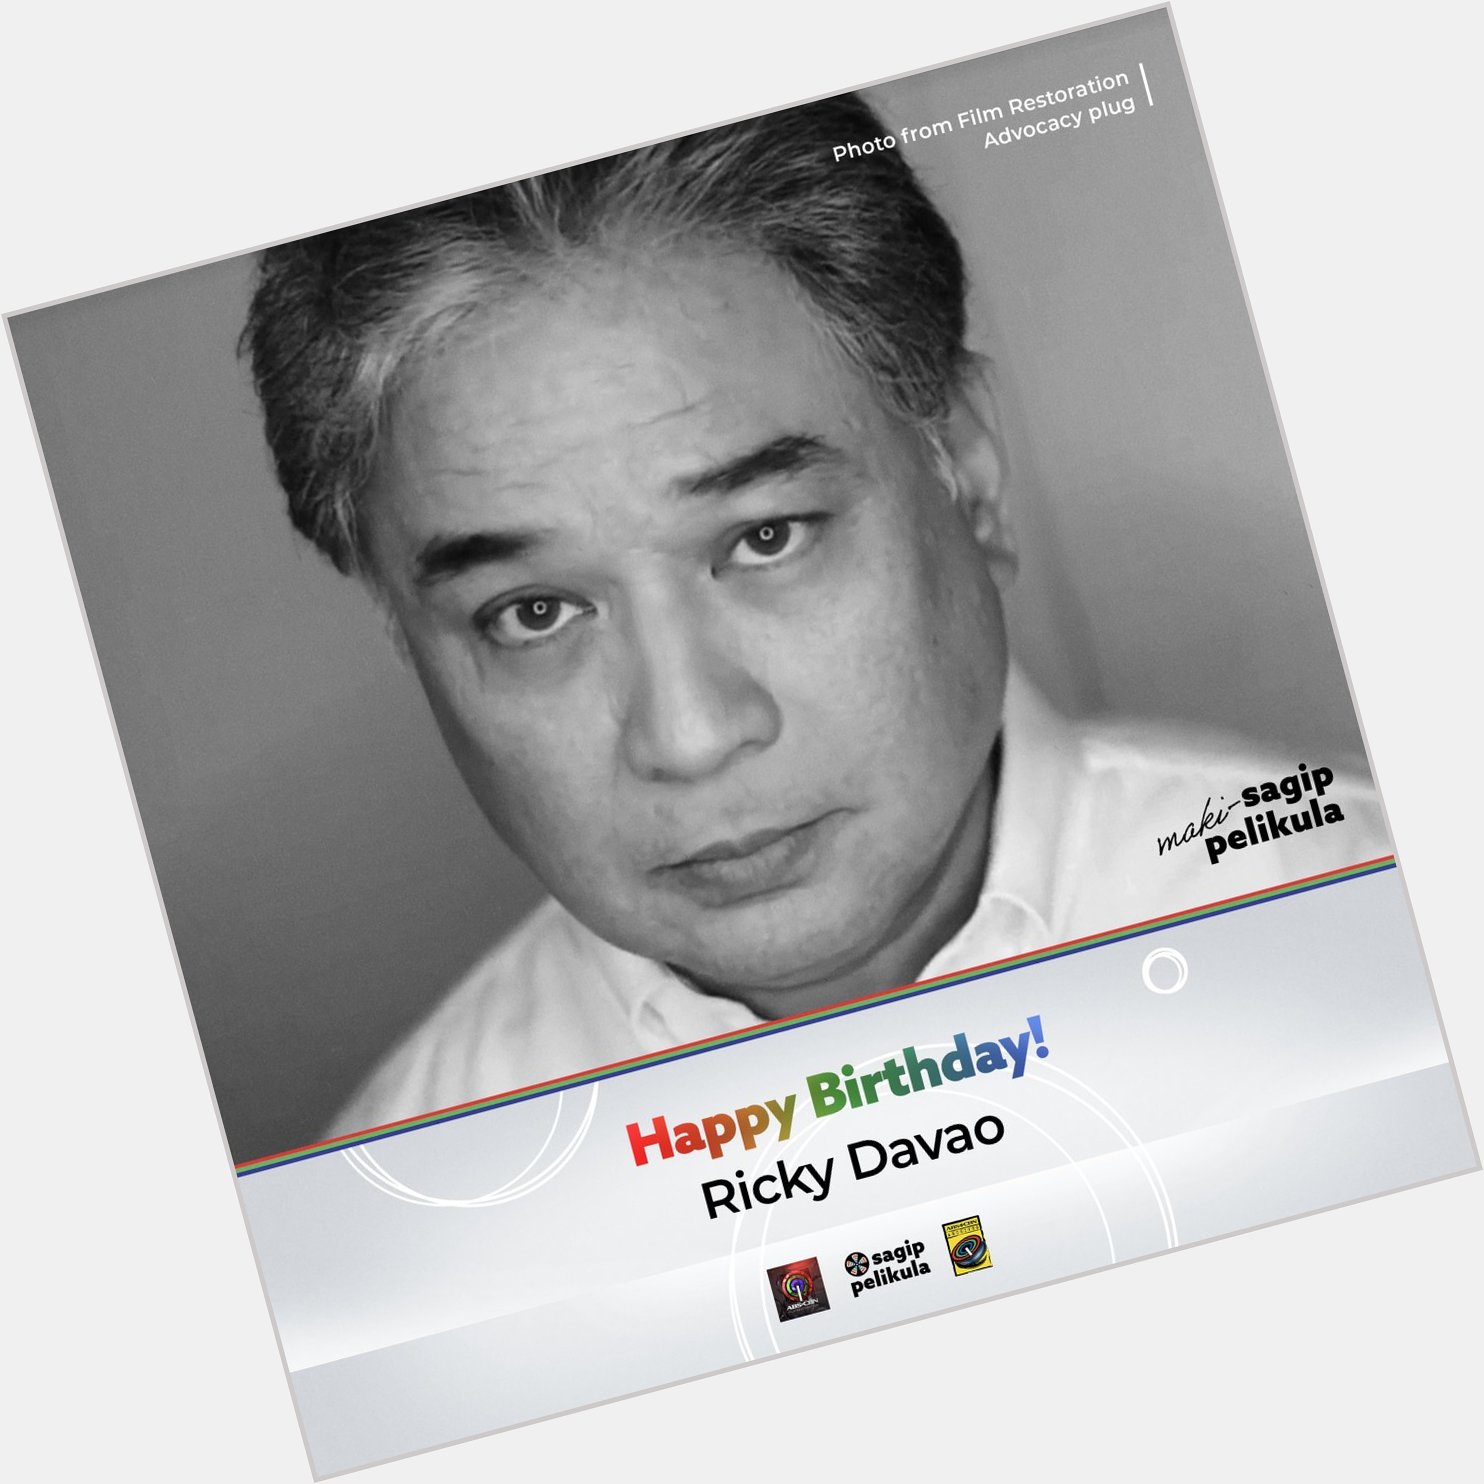 Happy birthday to Ricky Davao!

What\s your favorite film of his?  